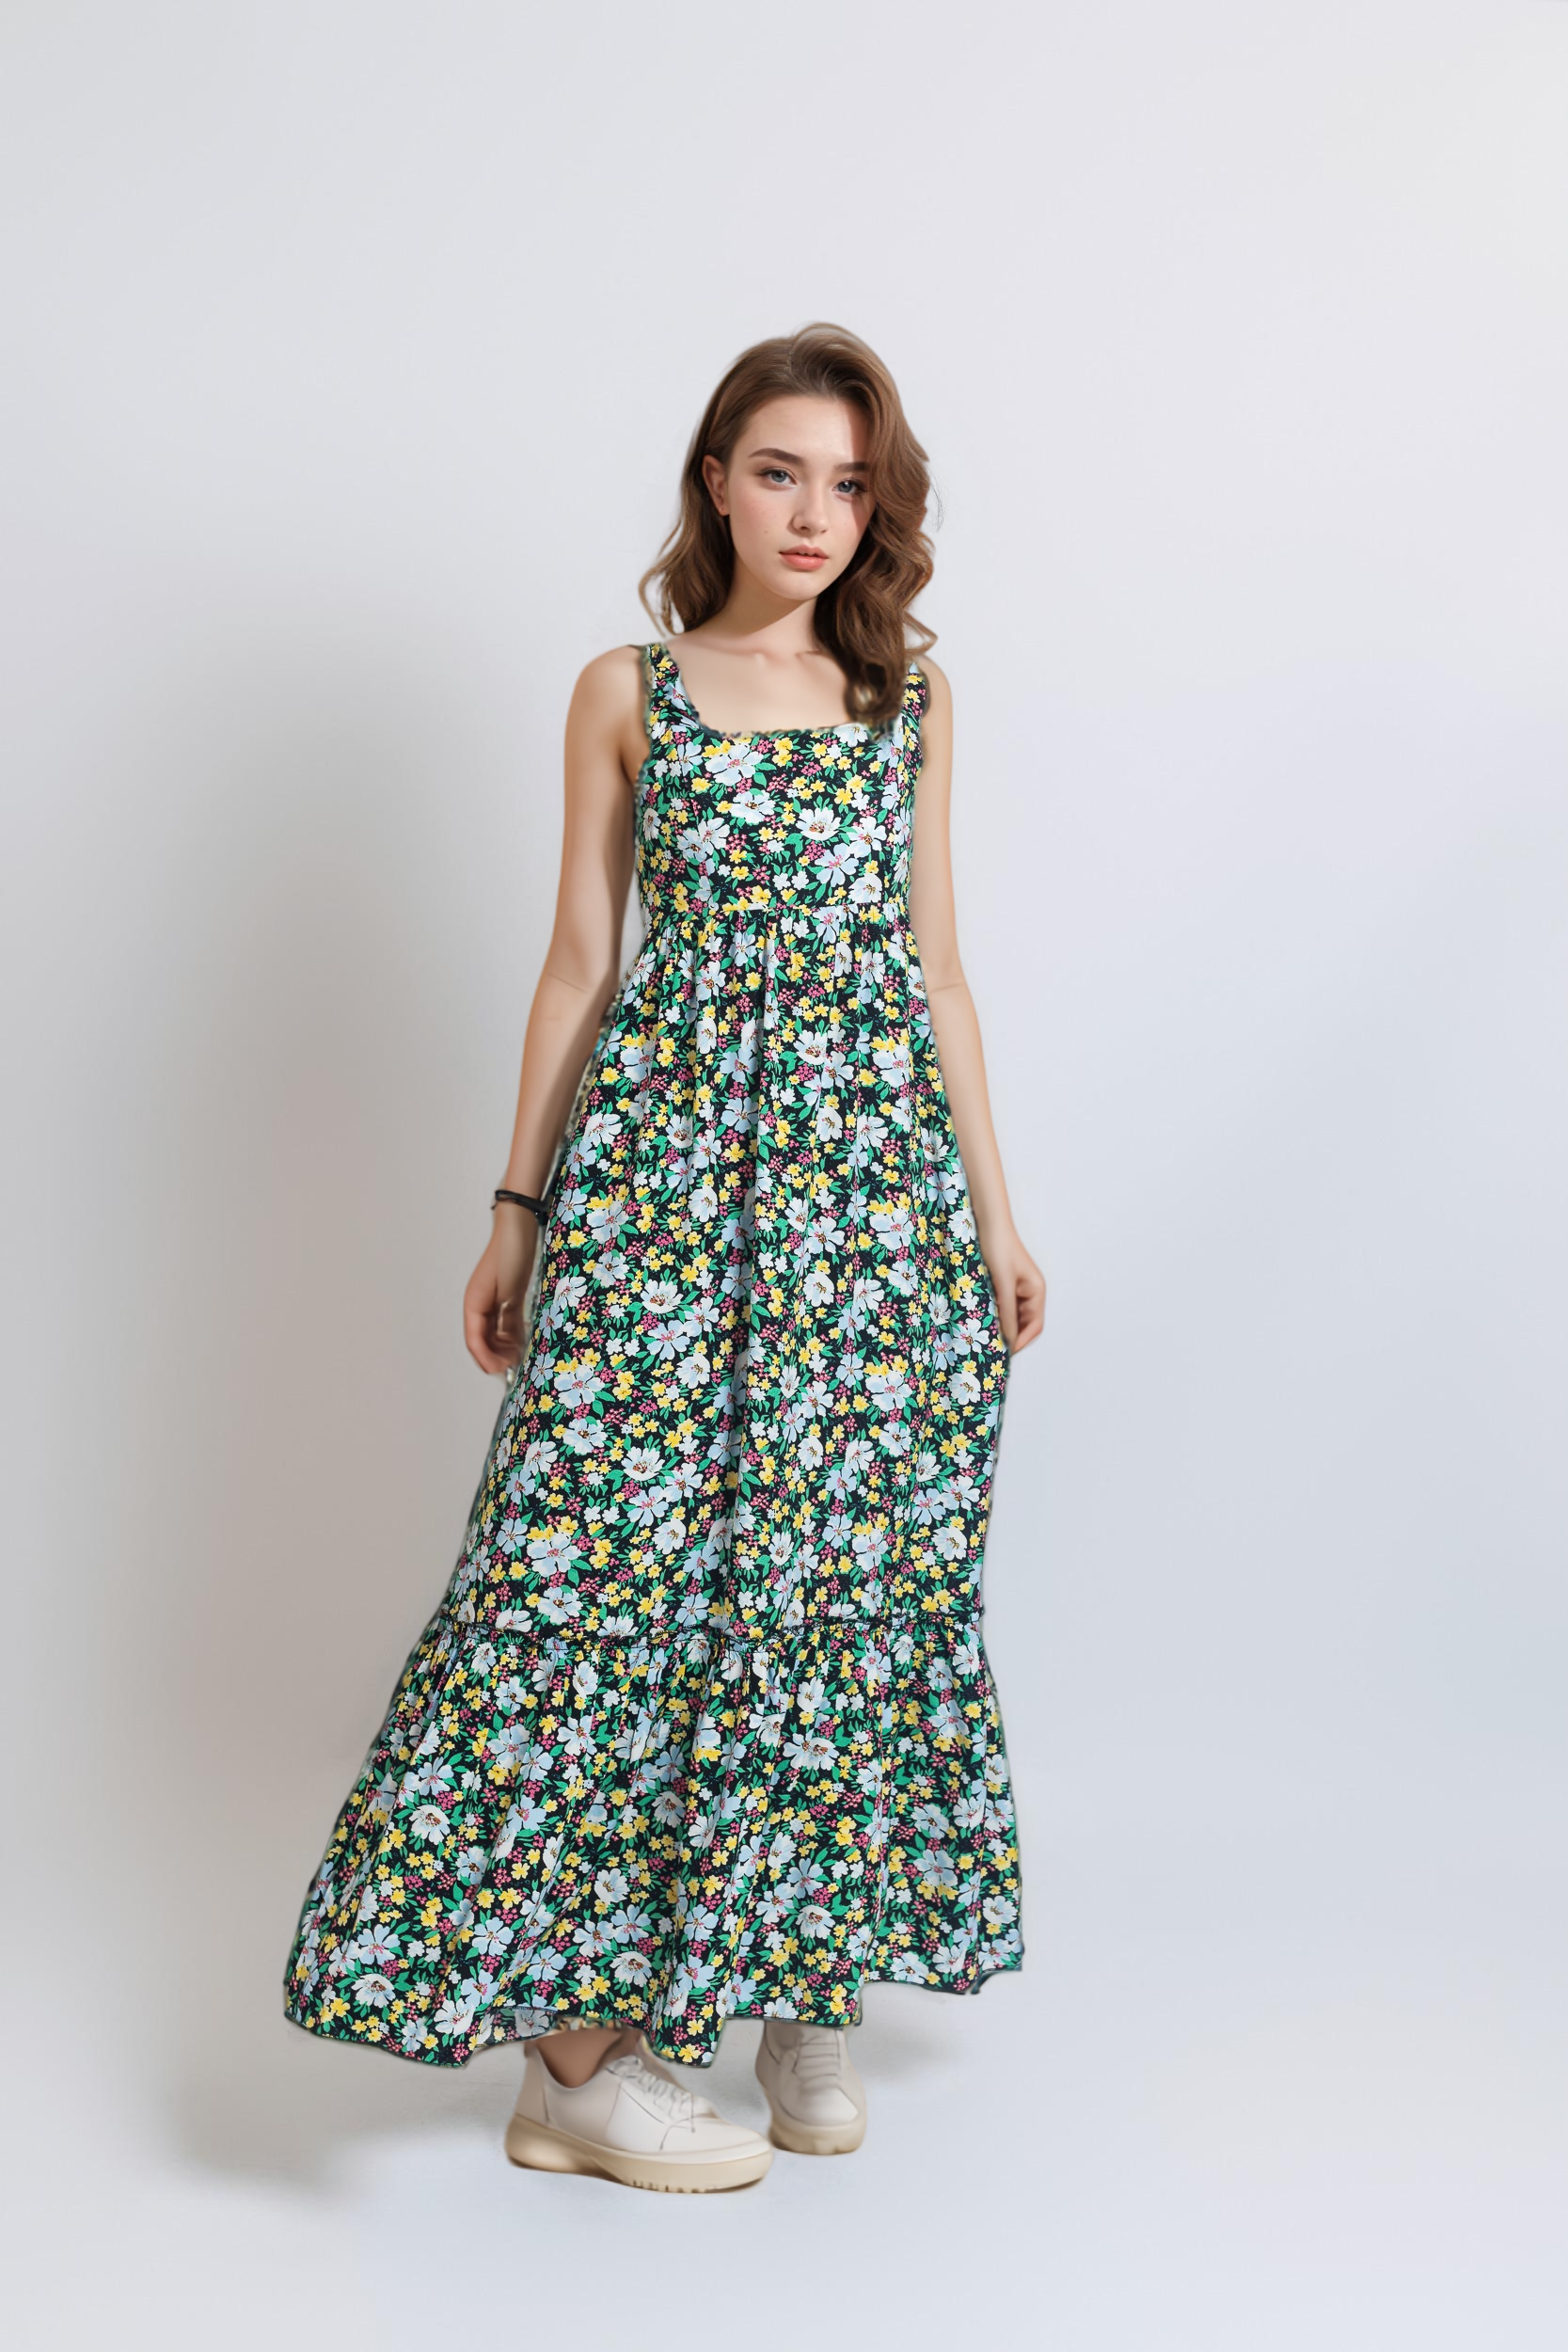 Floral Ruffled Dress For Women